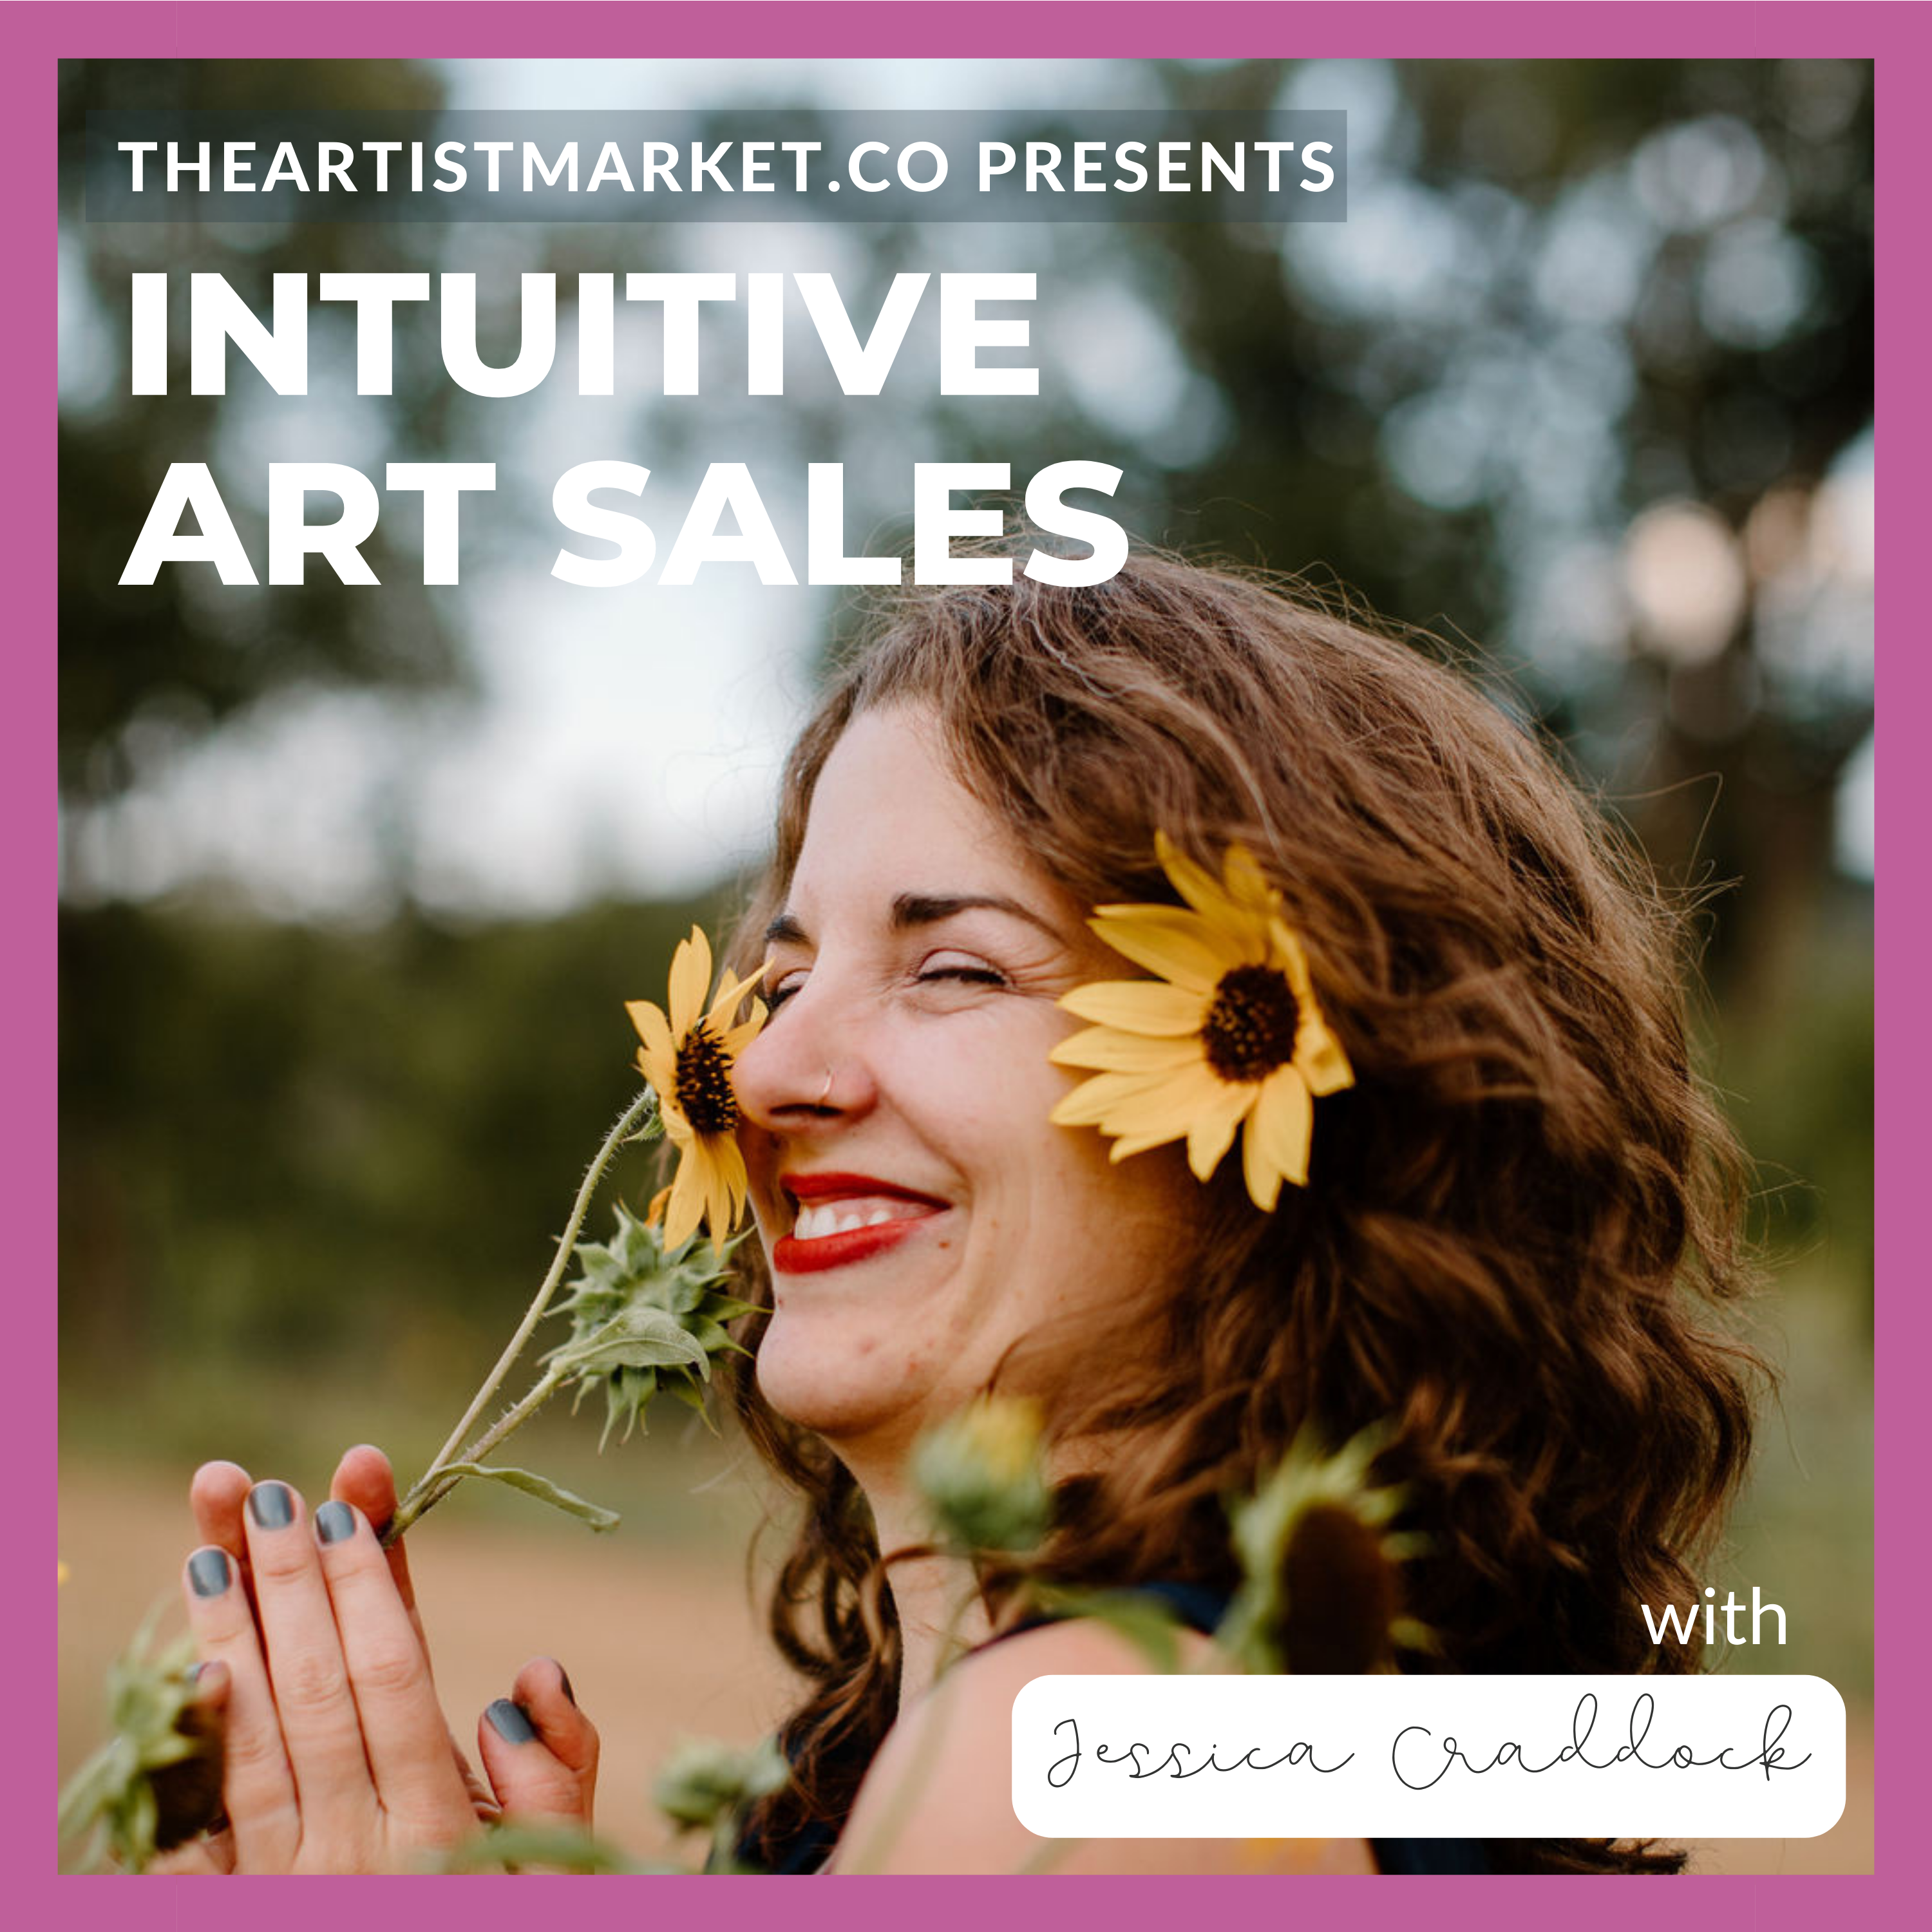 “How can I show up consistently online but maintain my creative freedom?” - Lissa Watson E58